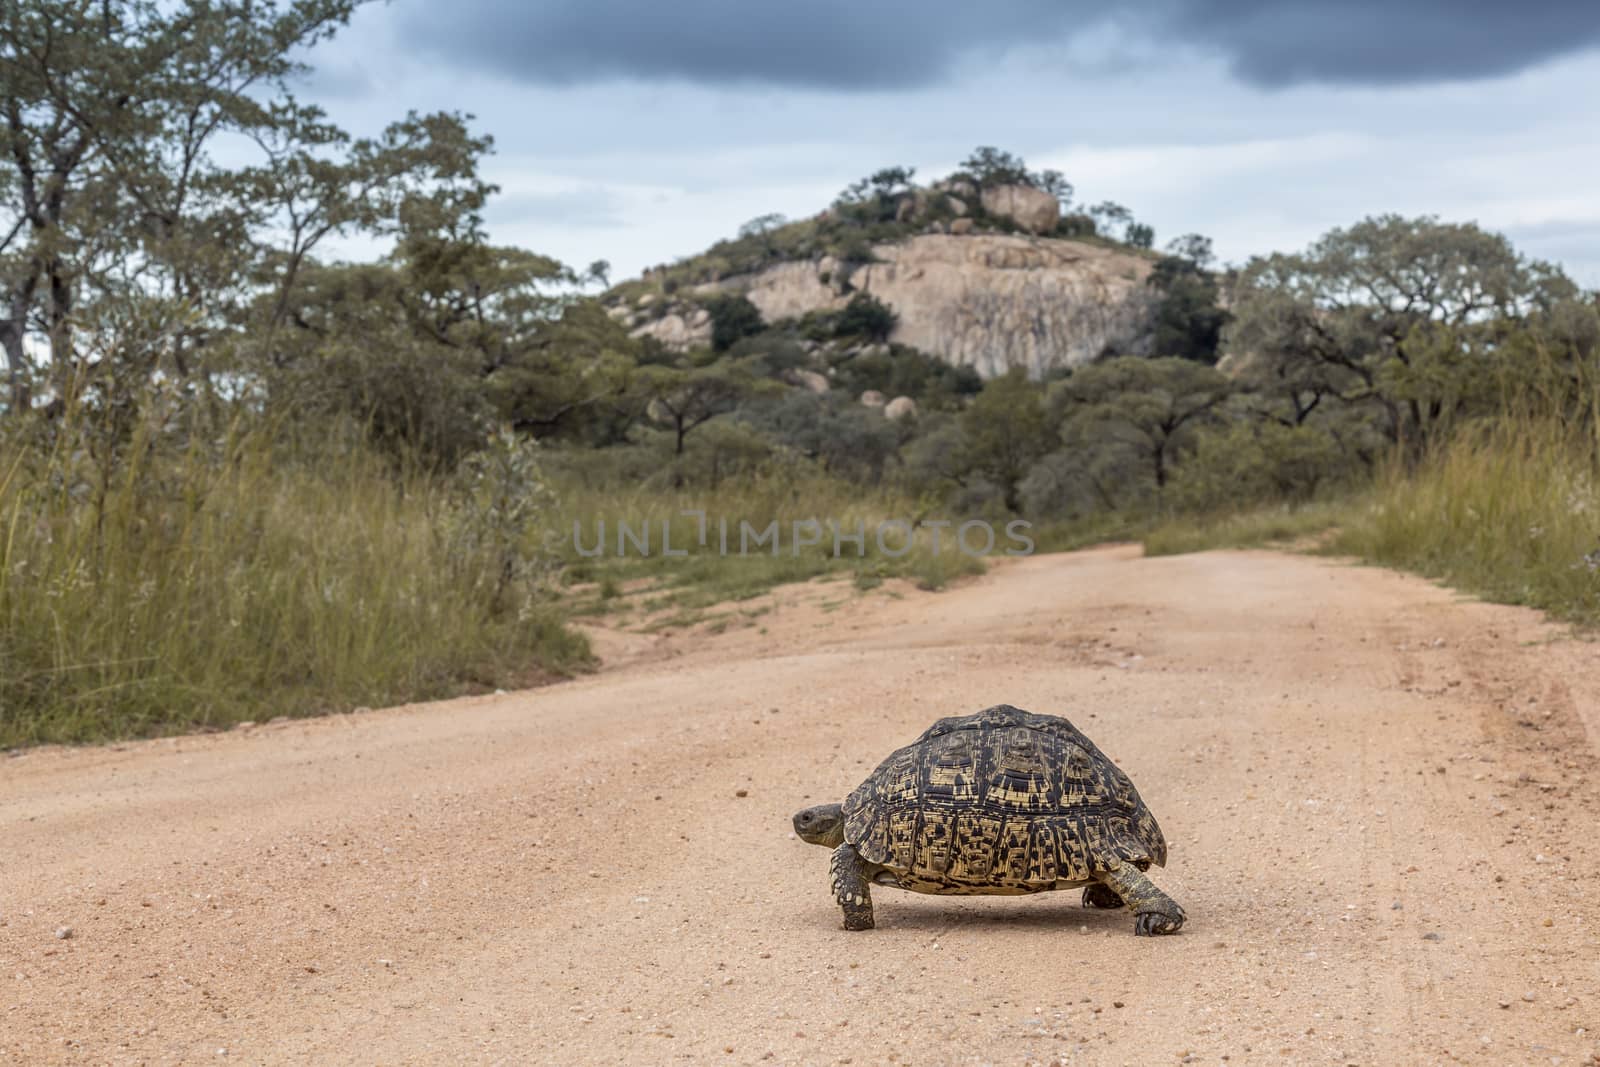 Leopard tortoise in Kruger National park, South Africa by PACOCOMO